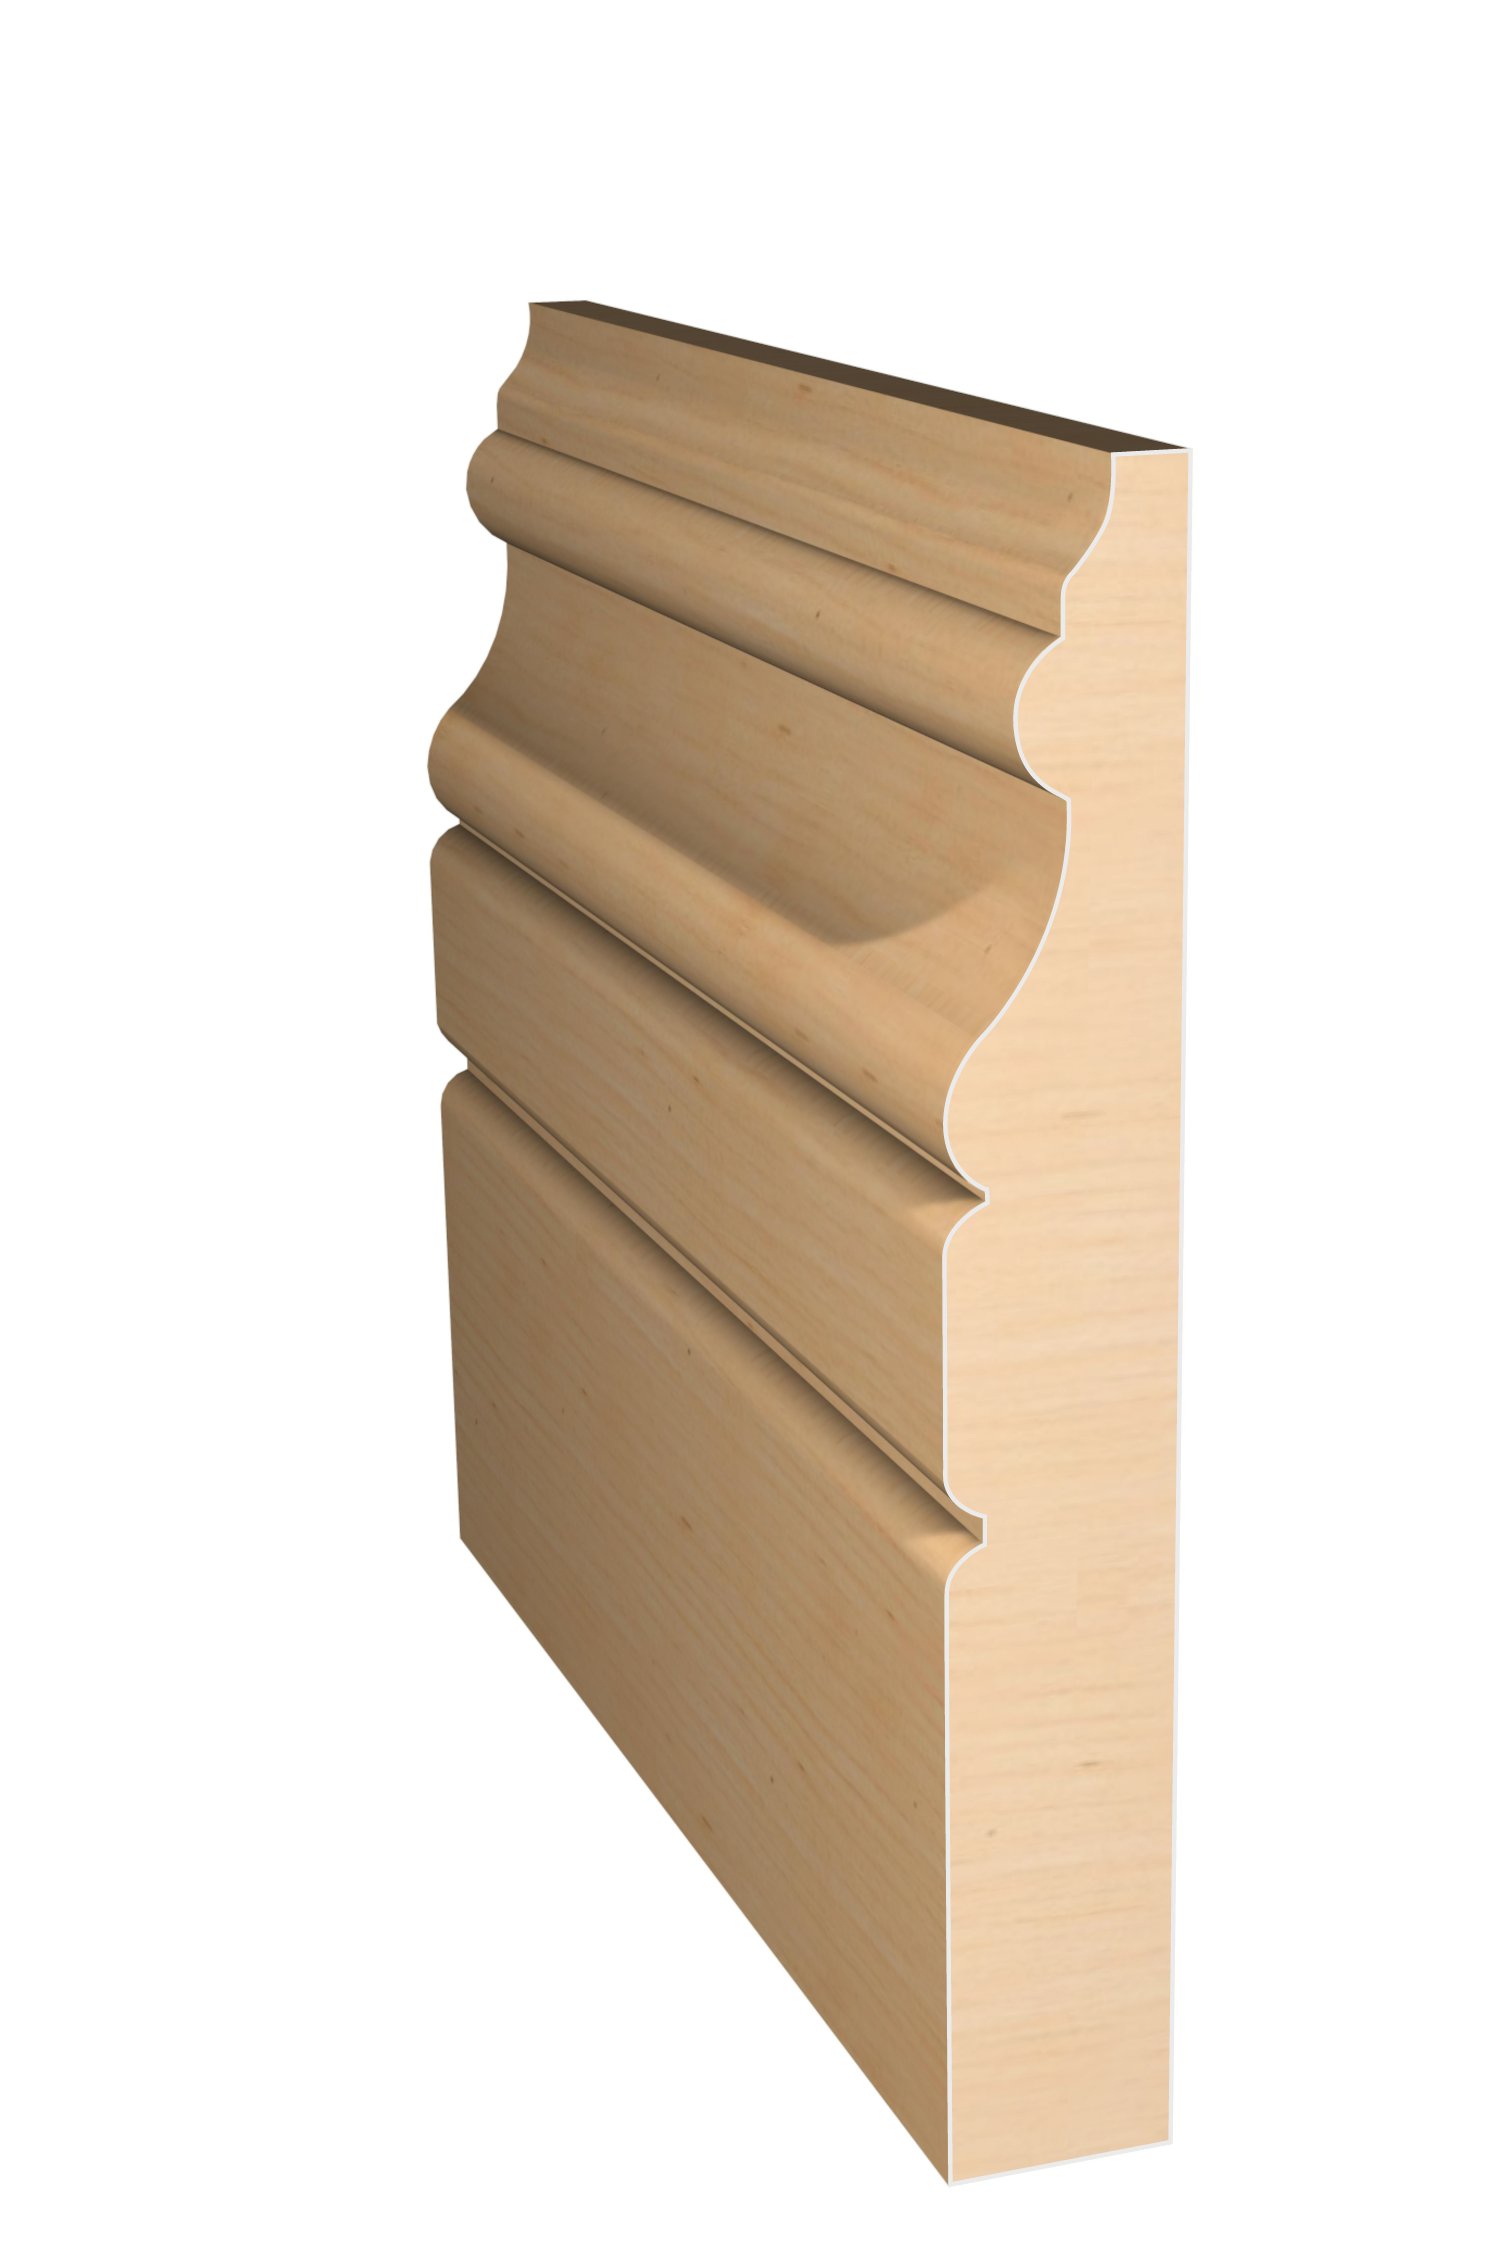 Three dimensional rendering of custom base wood molding BAPL5148 made by Public Lumber Company in Detroit.